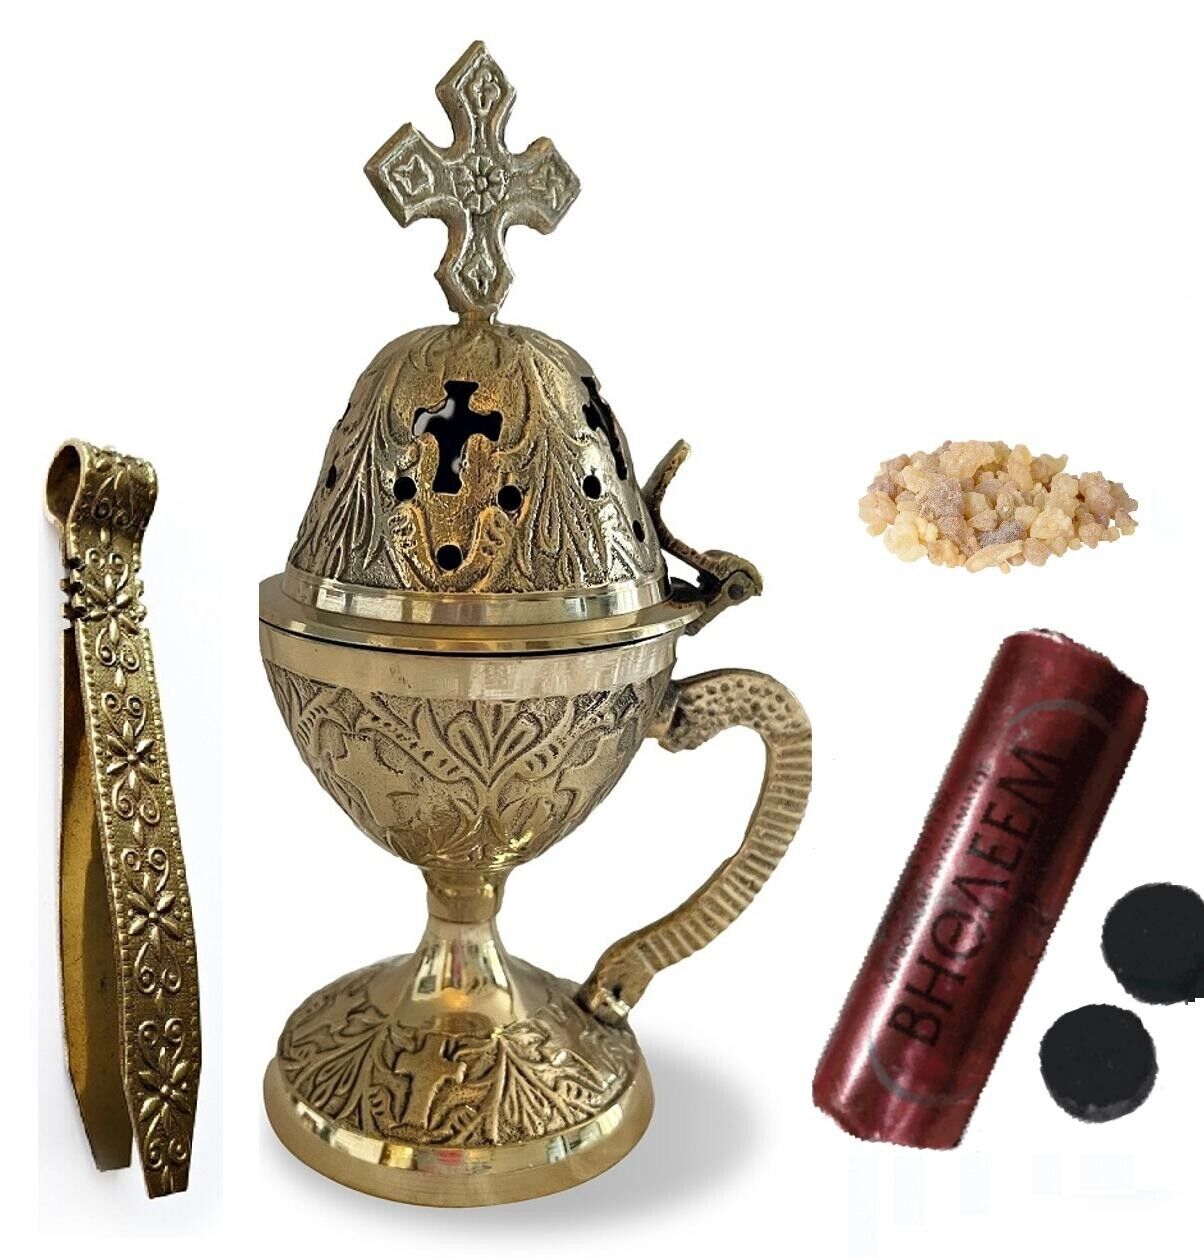 Incense Censer Set: Brass Censer, Tongs, Charcoal, and Frankincense Incense -NEW